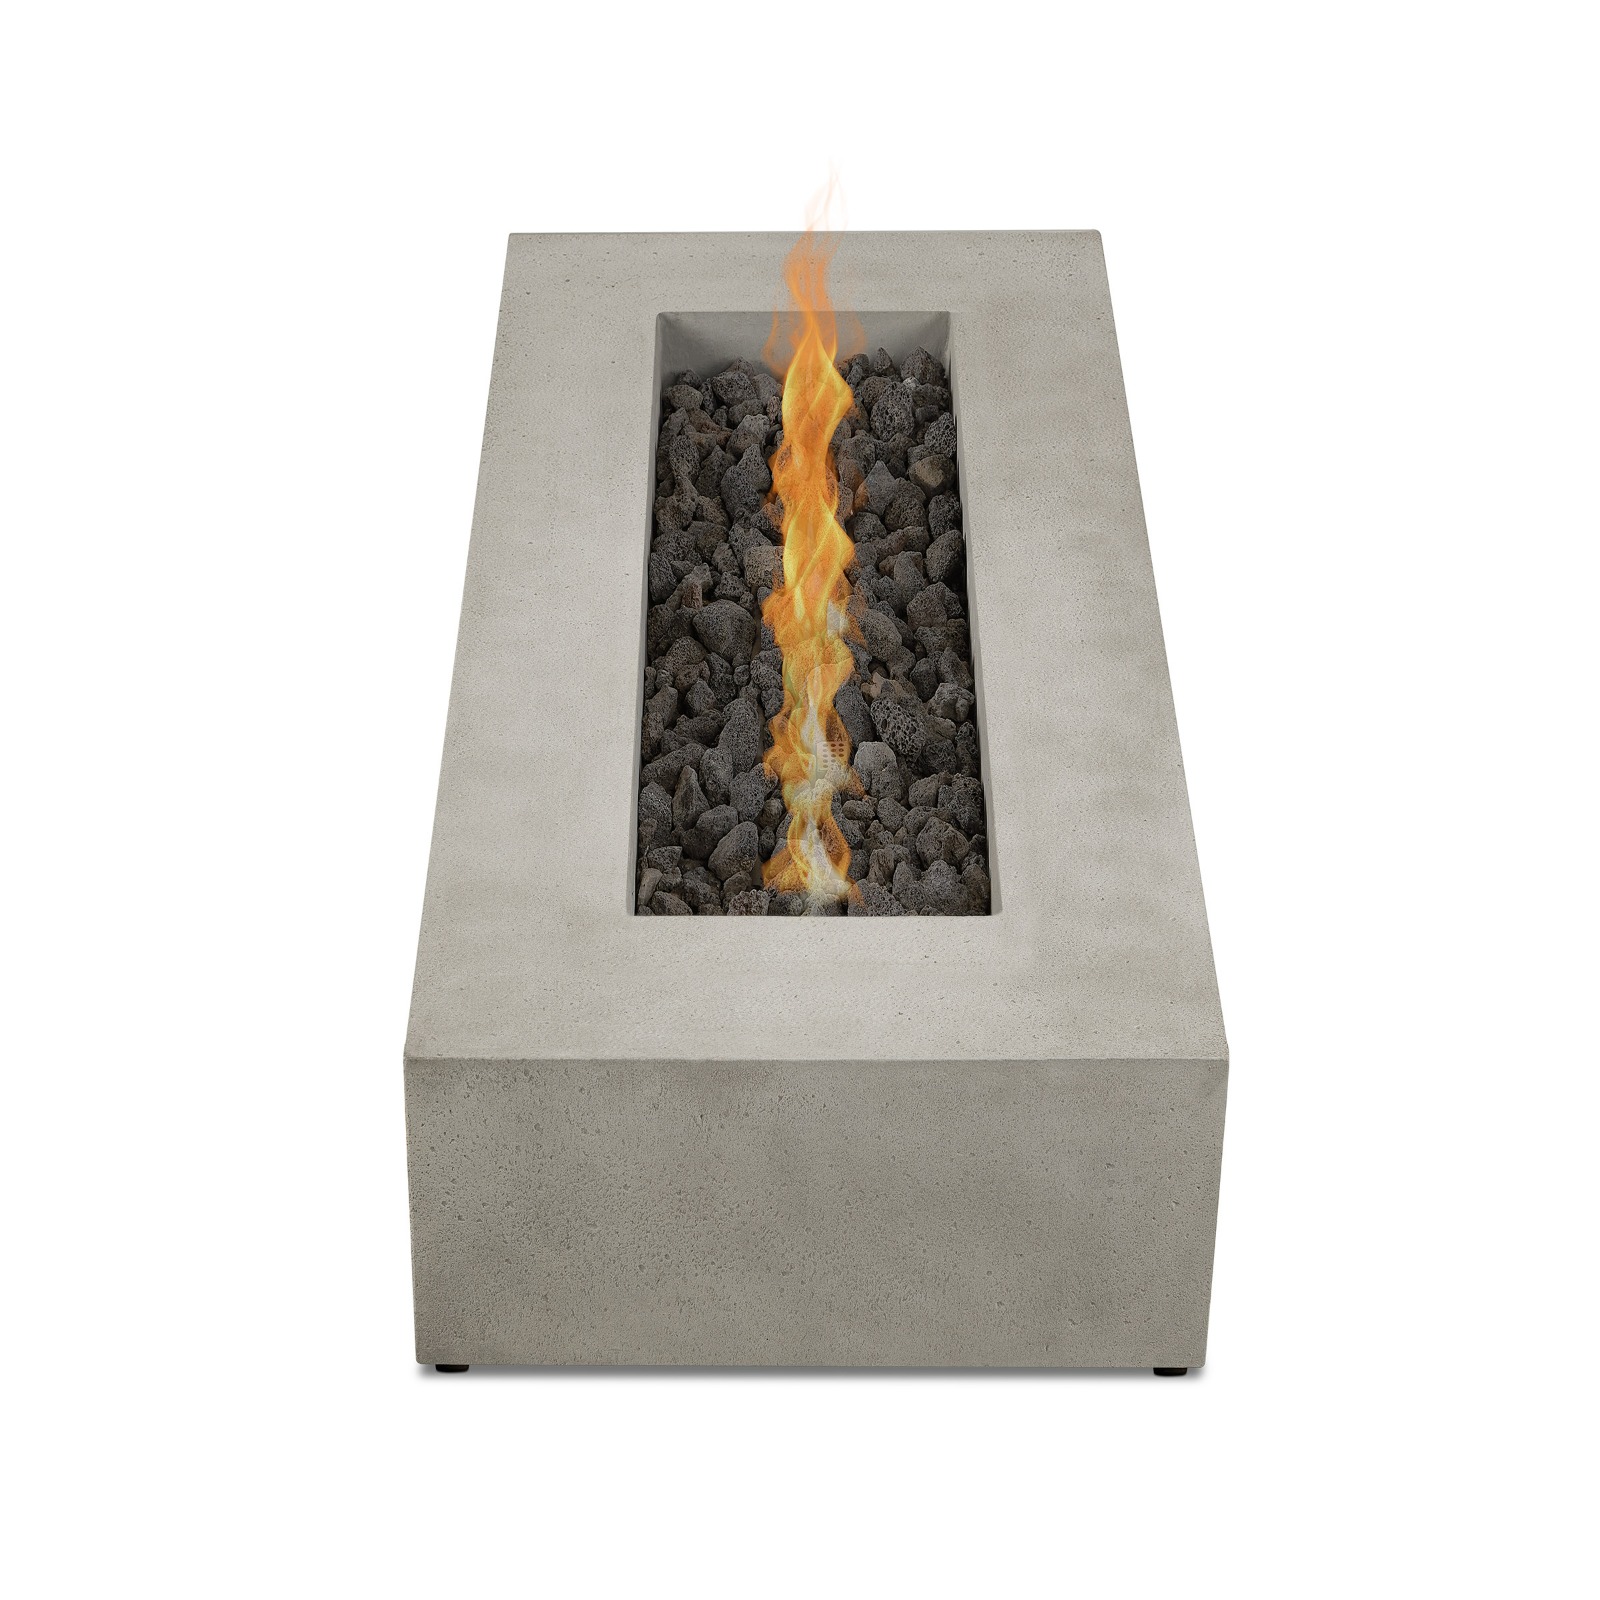 La Valle 72" Rectangle Propane Fire Table in flint top view